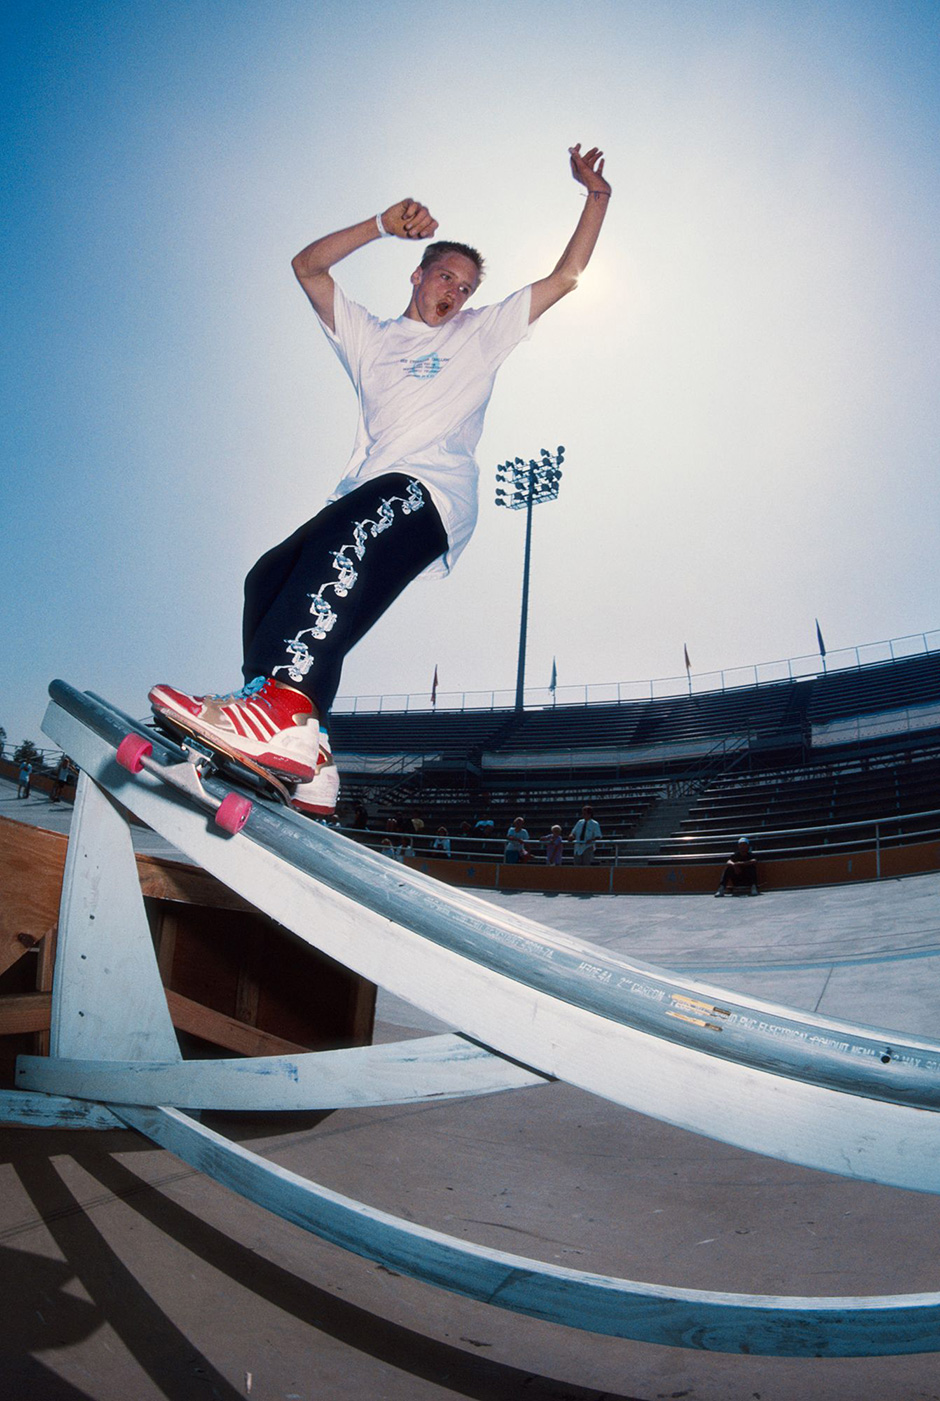 Mike Vallely frontside boardslides and Paul Sunman shoots in 1987